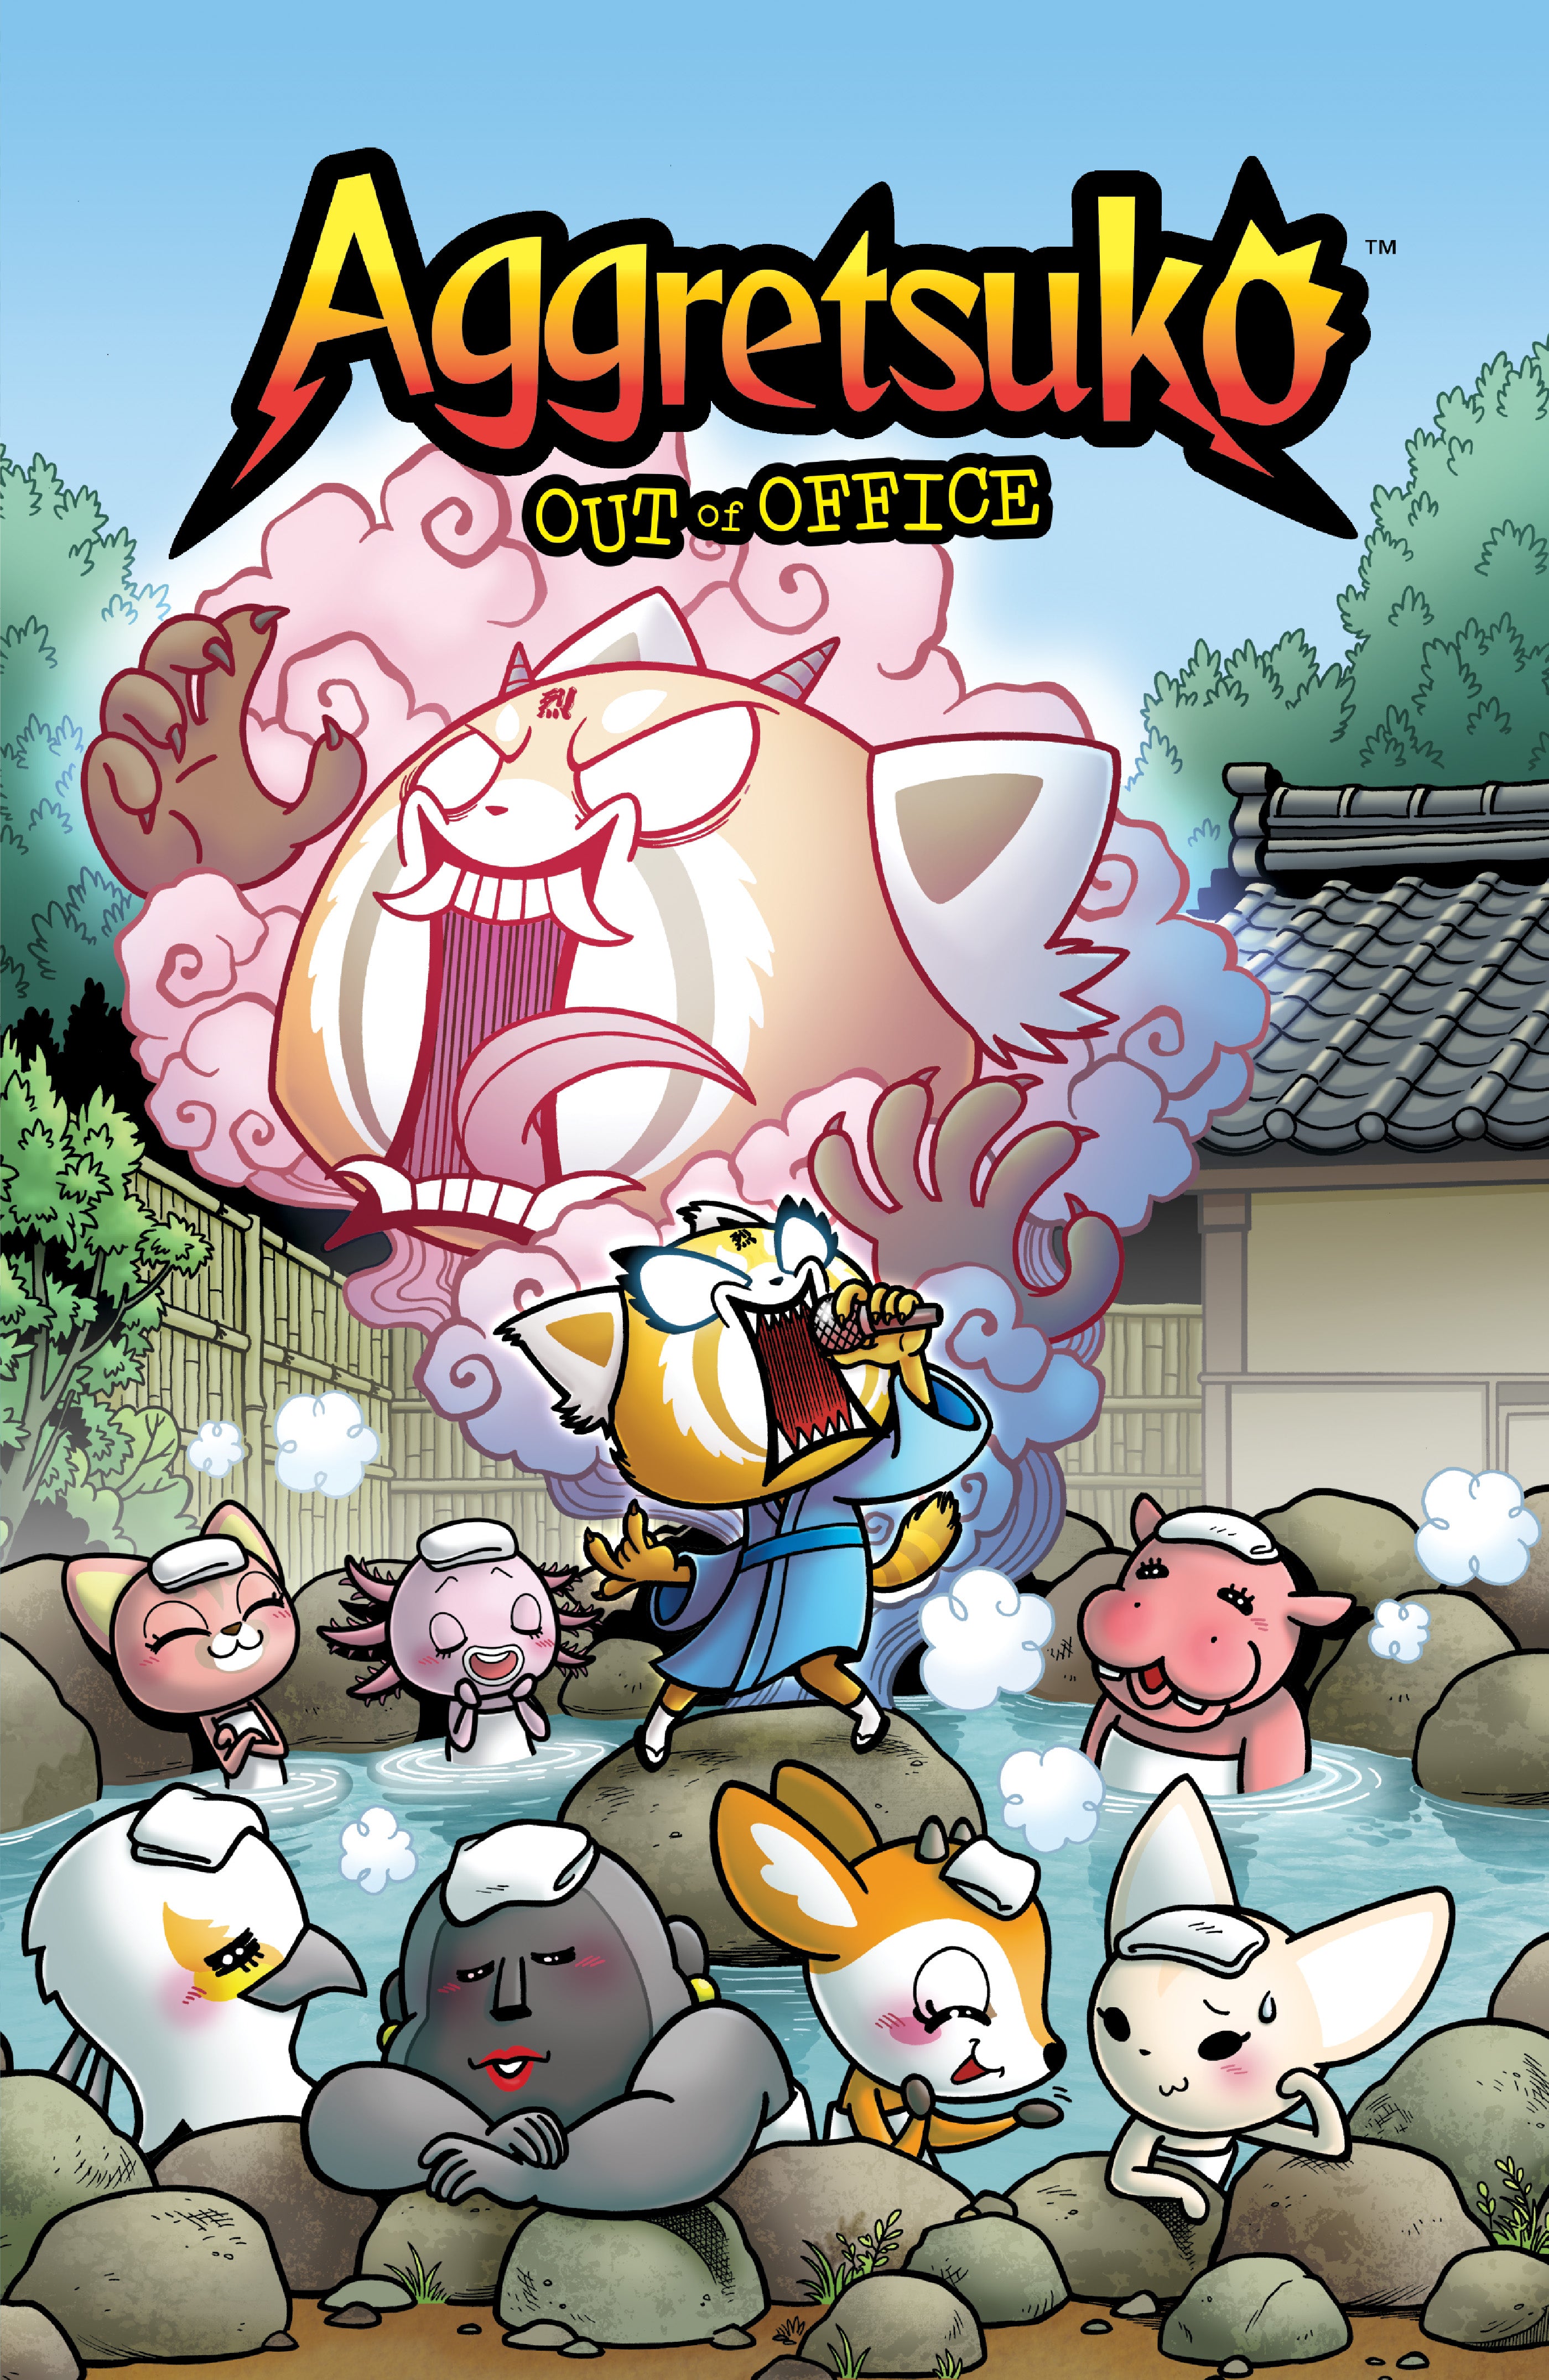 AGGRETSUKO TRADE PAPERBACK OUT OF OFFICE